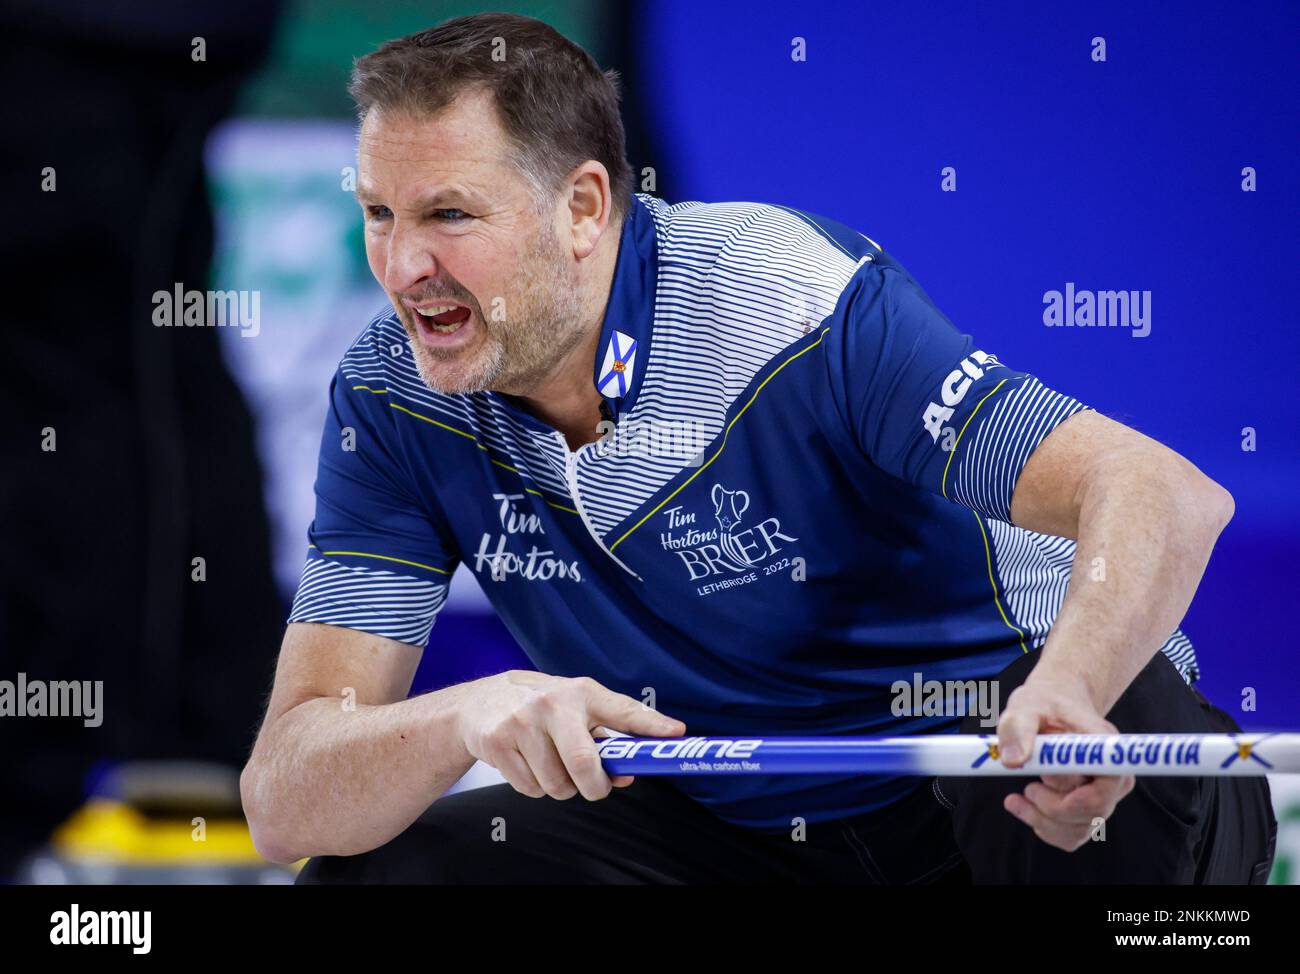 Team Nova Scotia skip Paul Flemming directs his teammates while playing Team British Columbia at the Tim Hortons Brier curling event in Lethbridge, Alberta, Tuesday, March 8, 2022